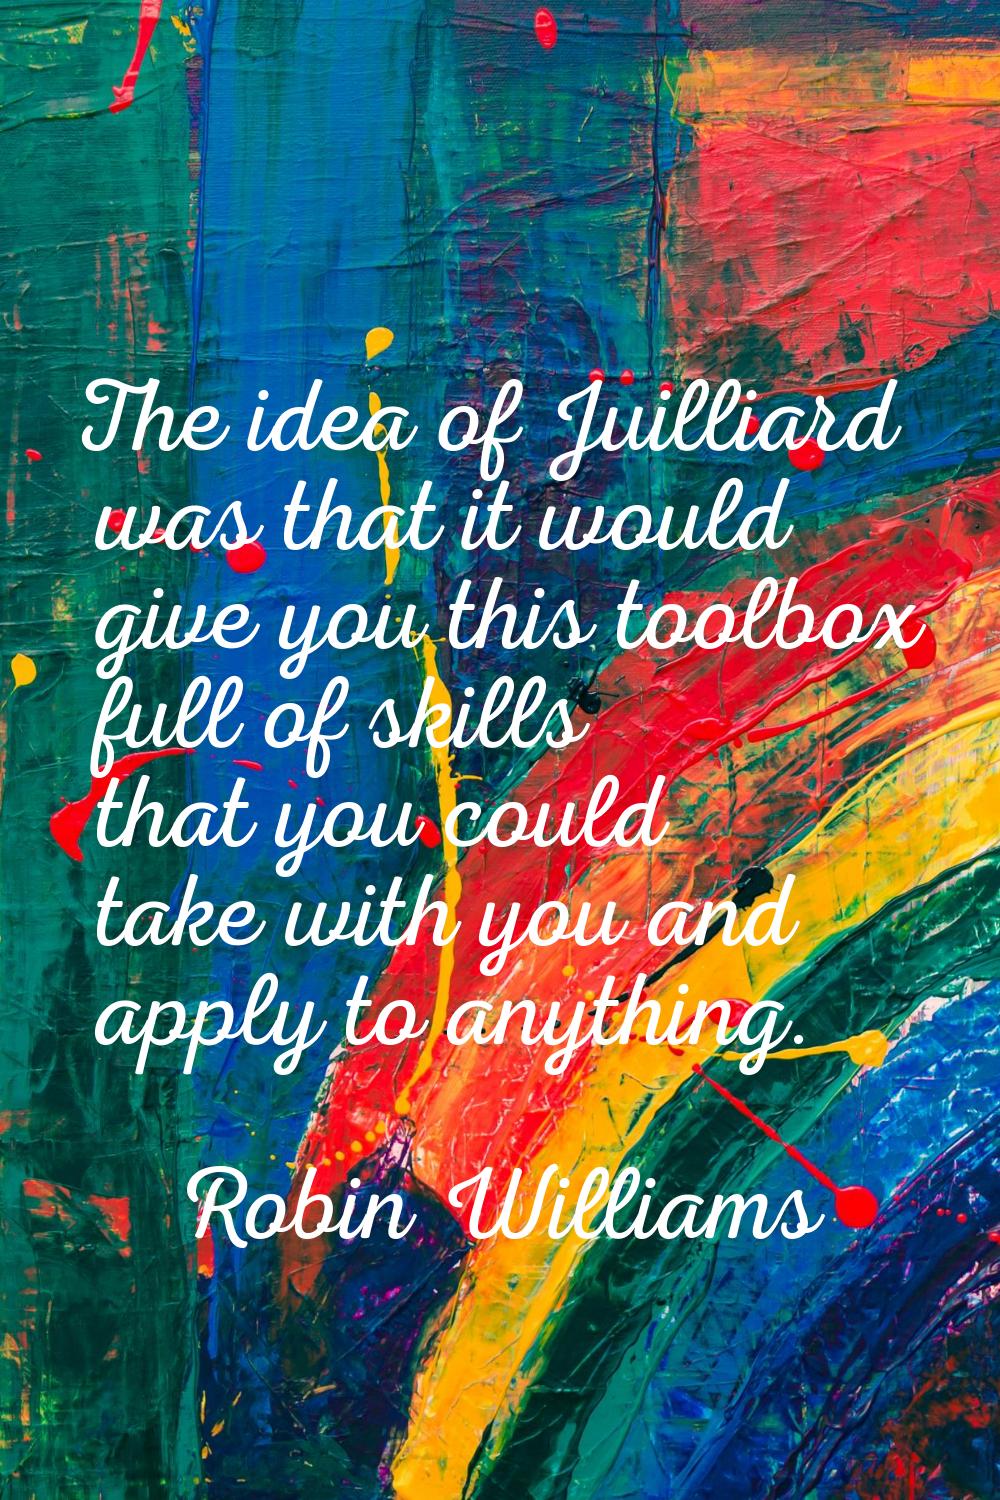 The idea of Juilliard was that it would give you this toolbox full of skills that you could take wi